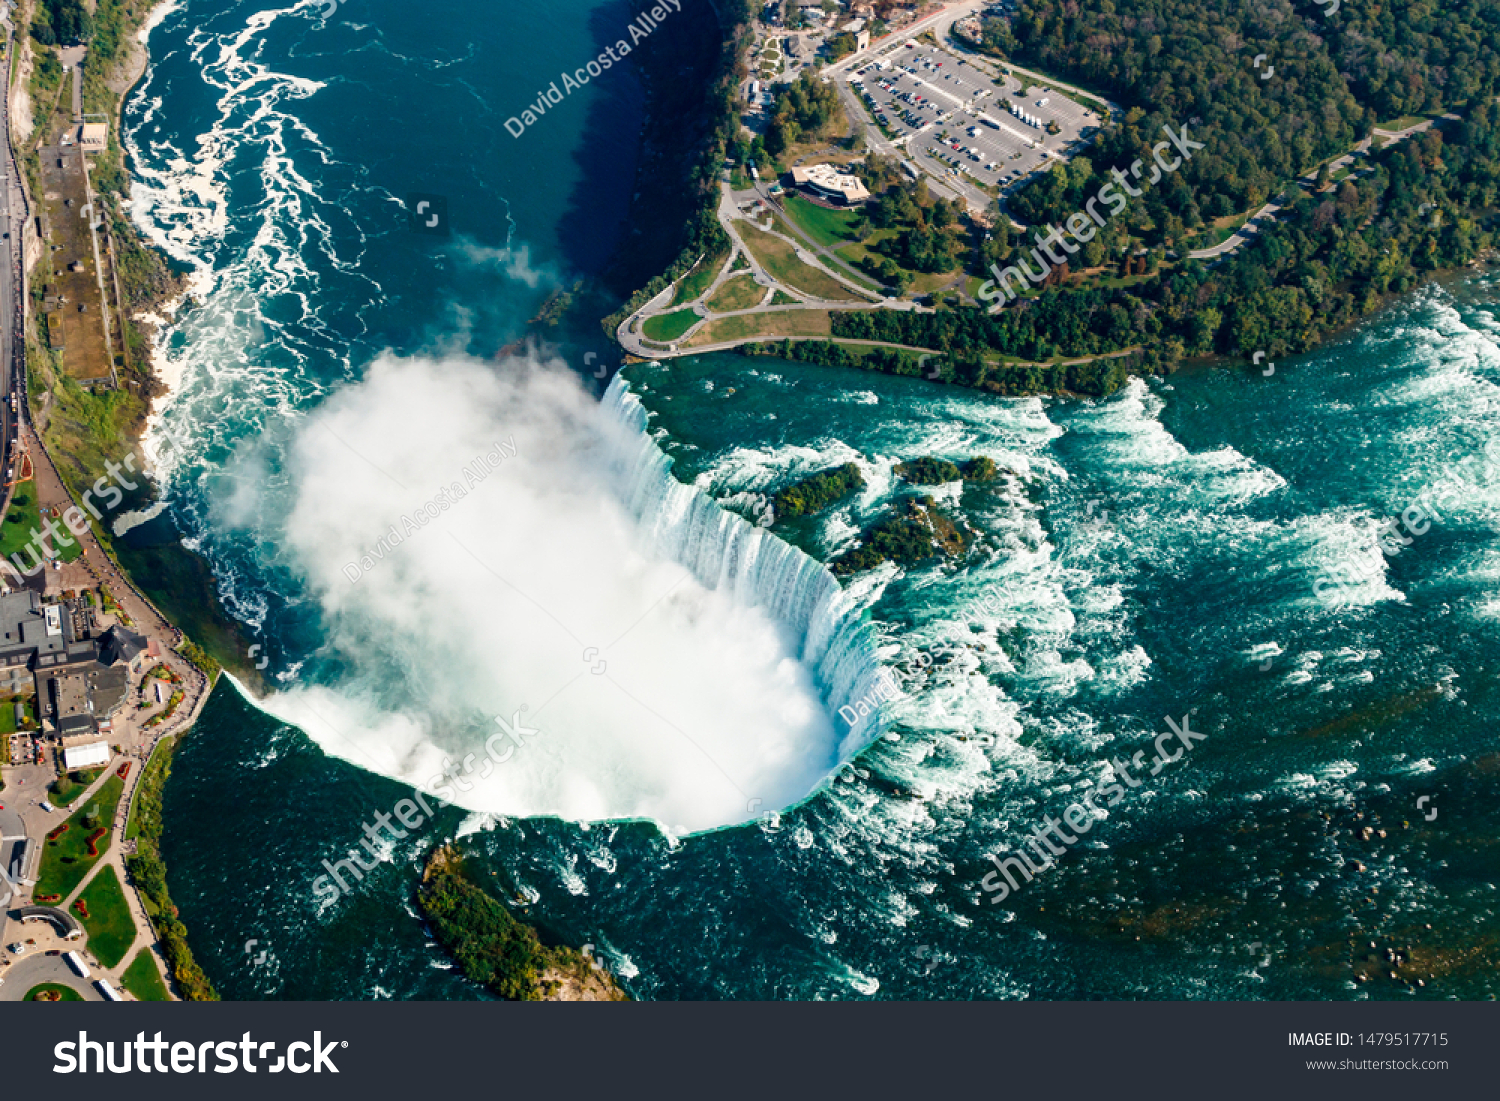 Niagara Falls Aerial View Helicopter Canadian Stock Photo Edit Now 1479517715